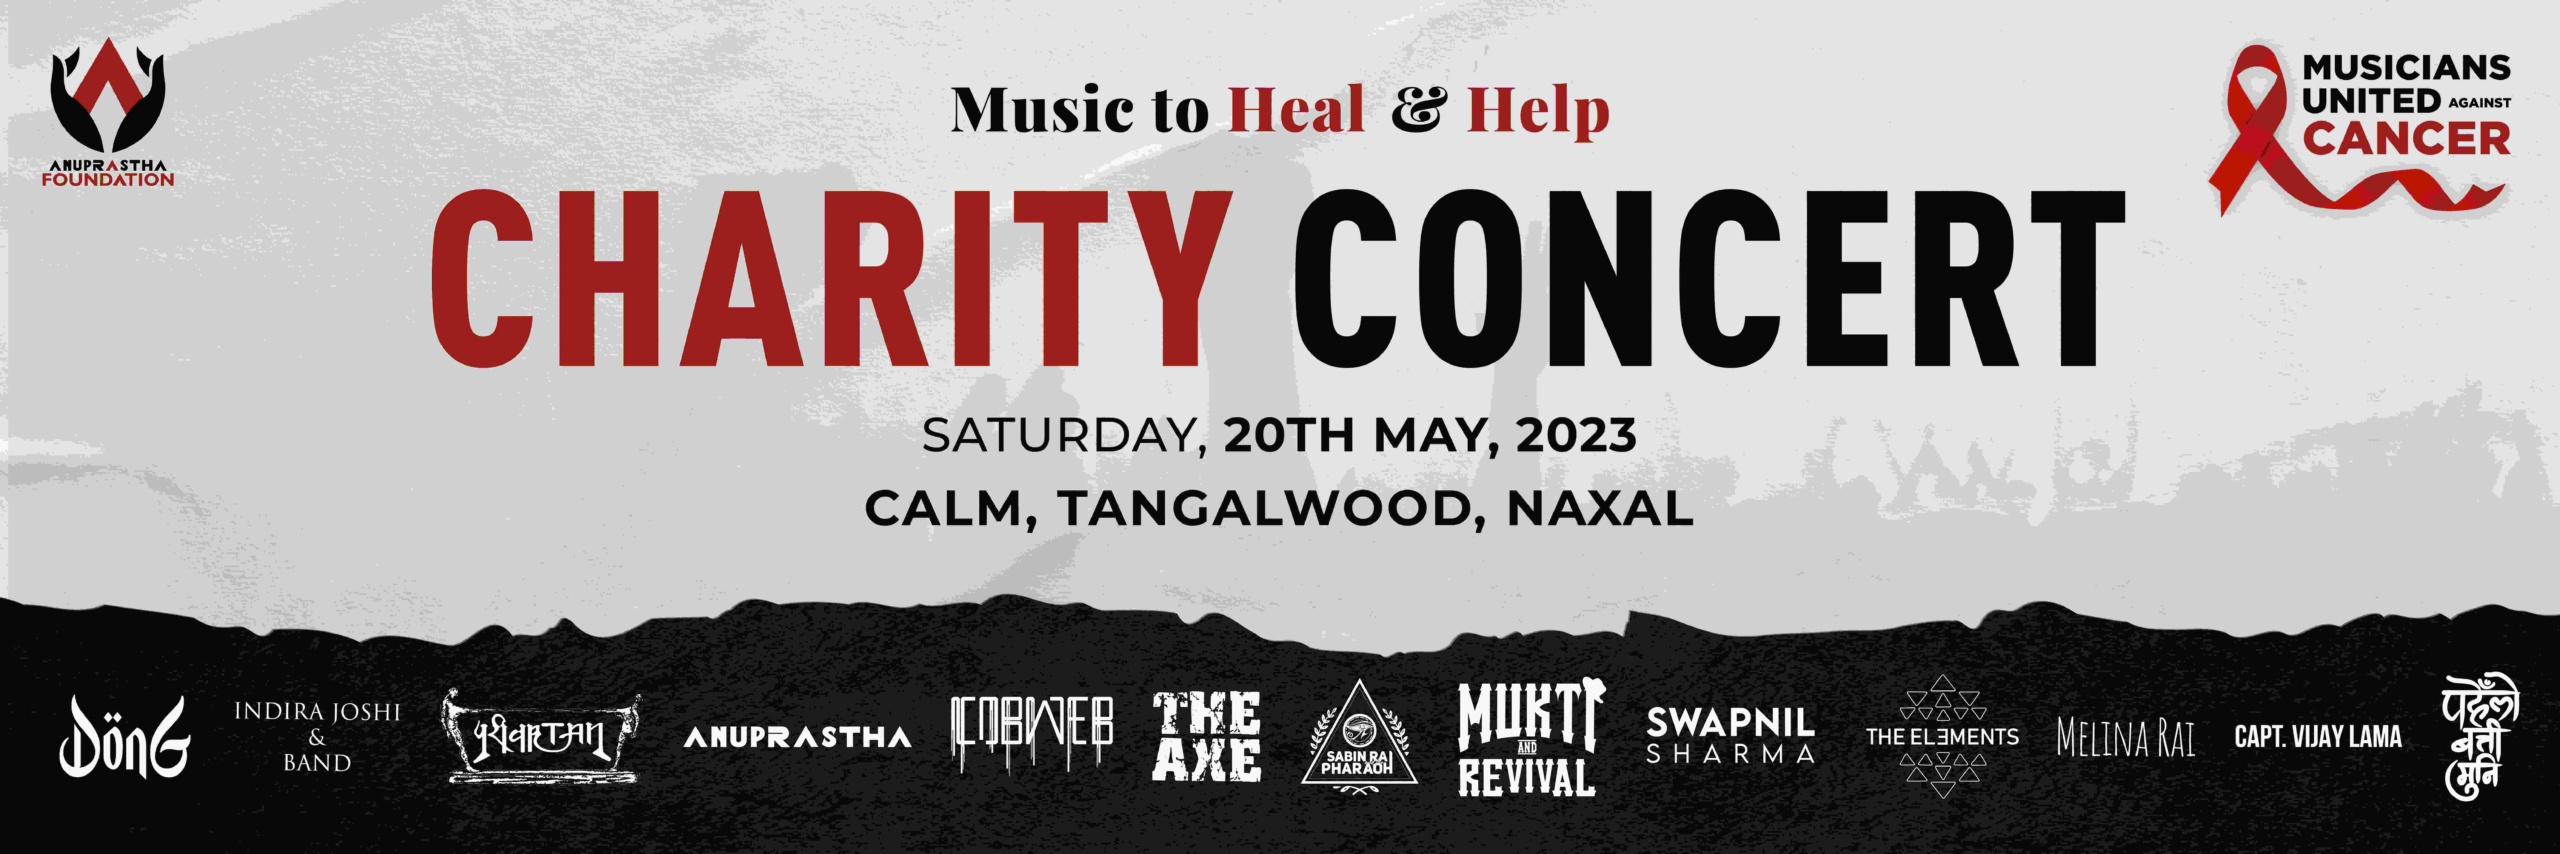 Music To Heal & Help: Charity Concert